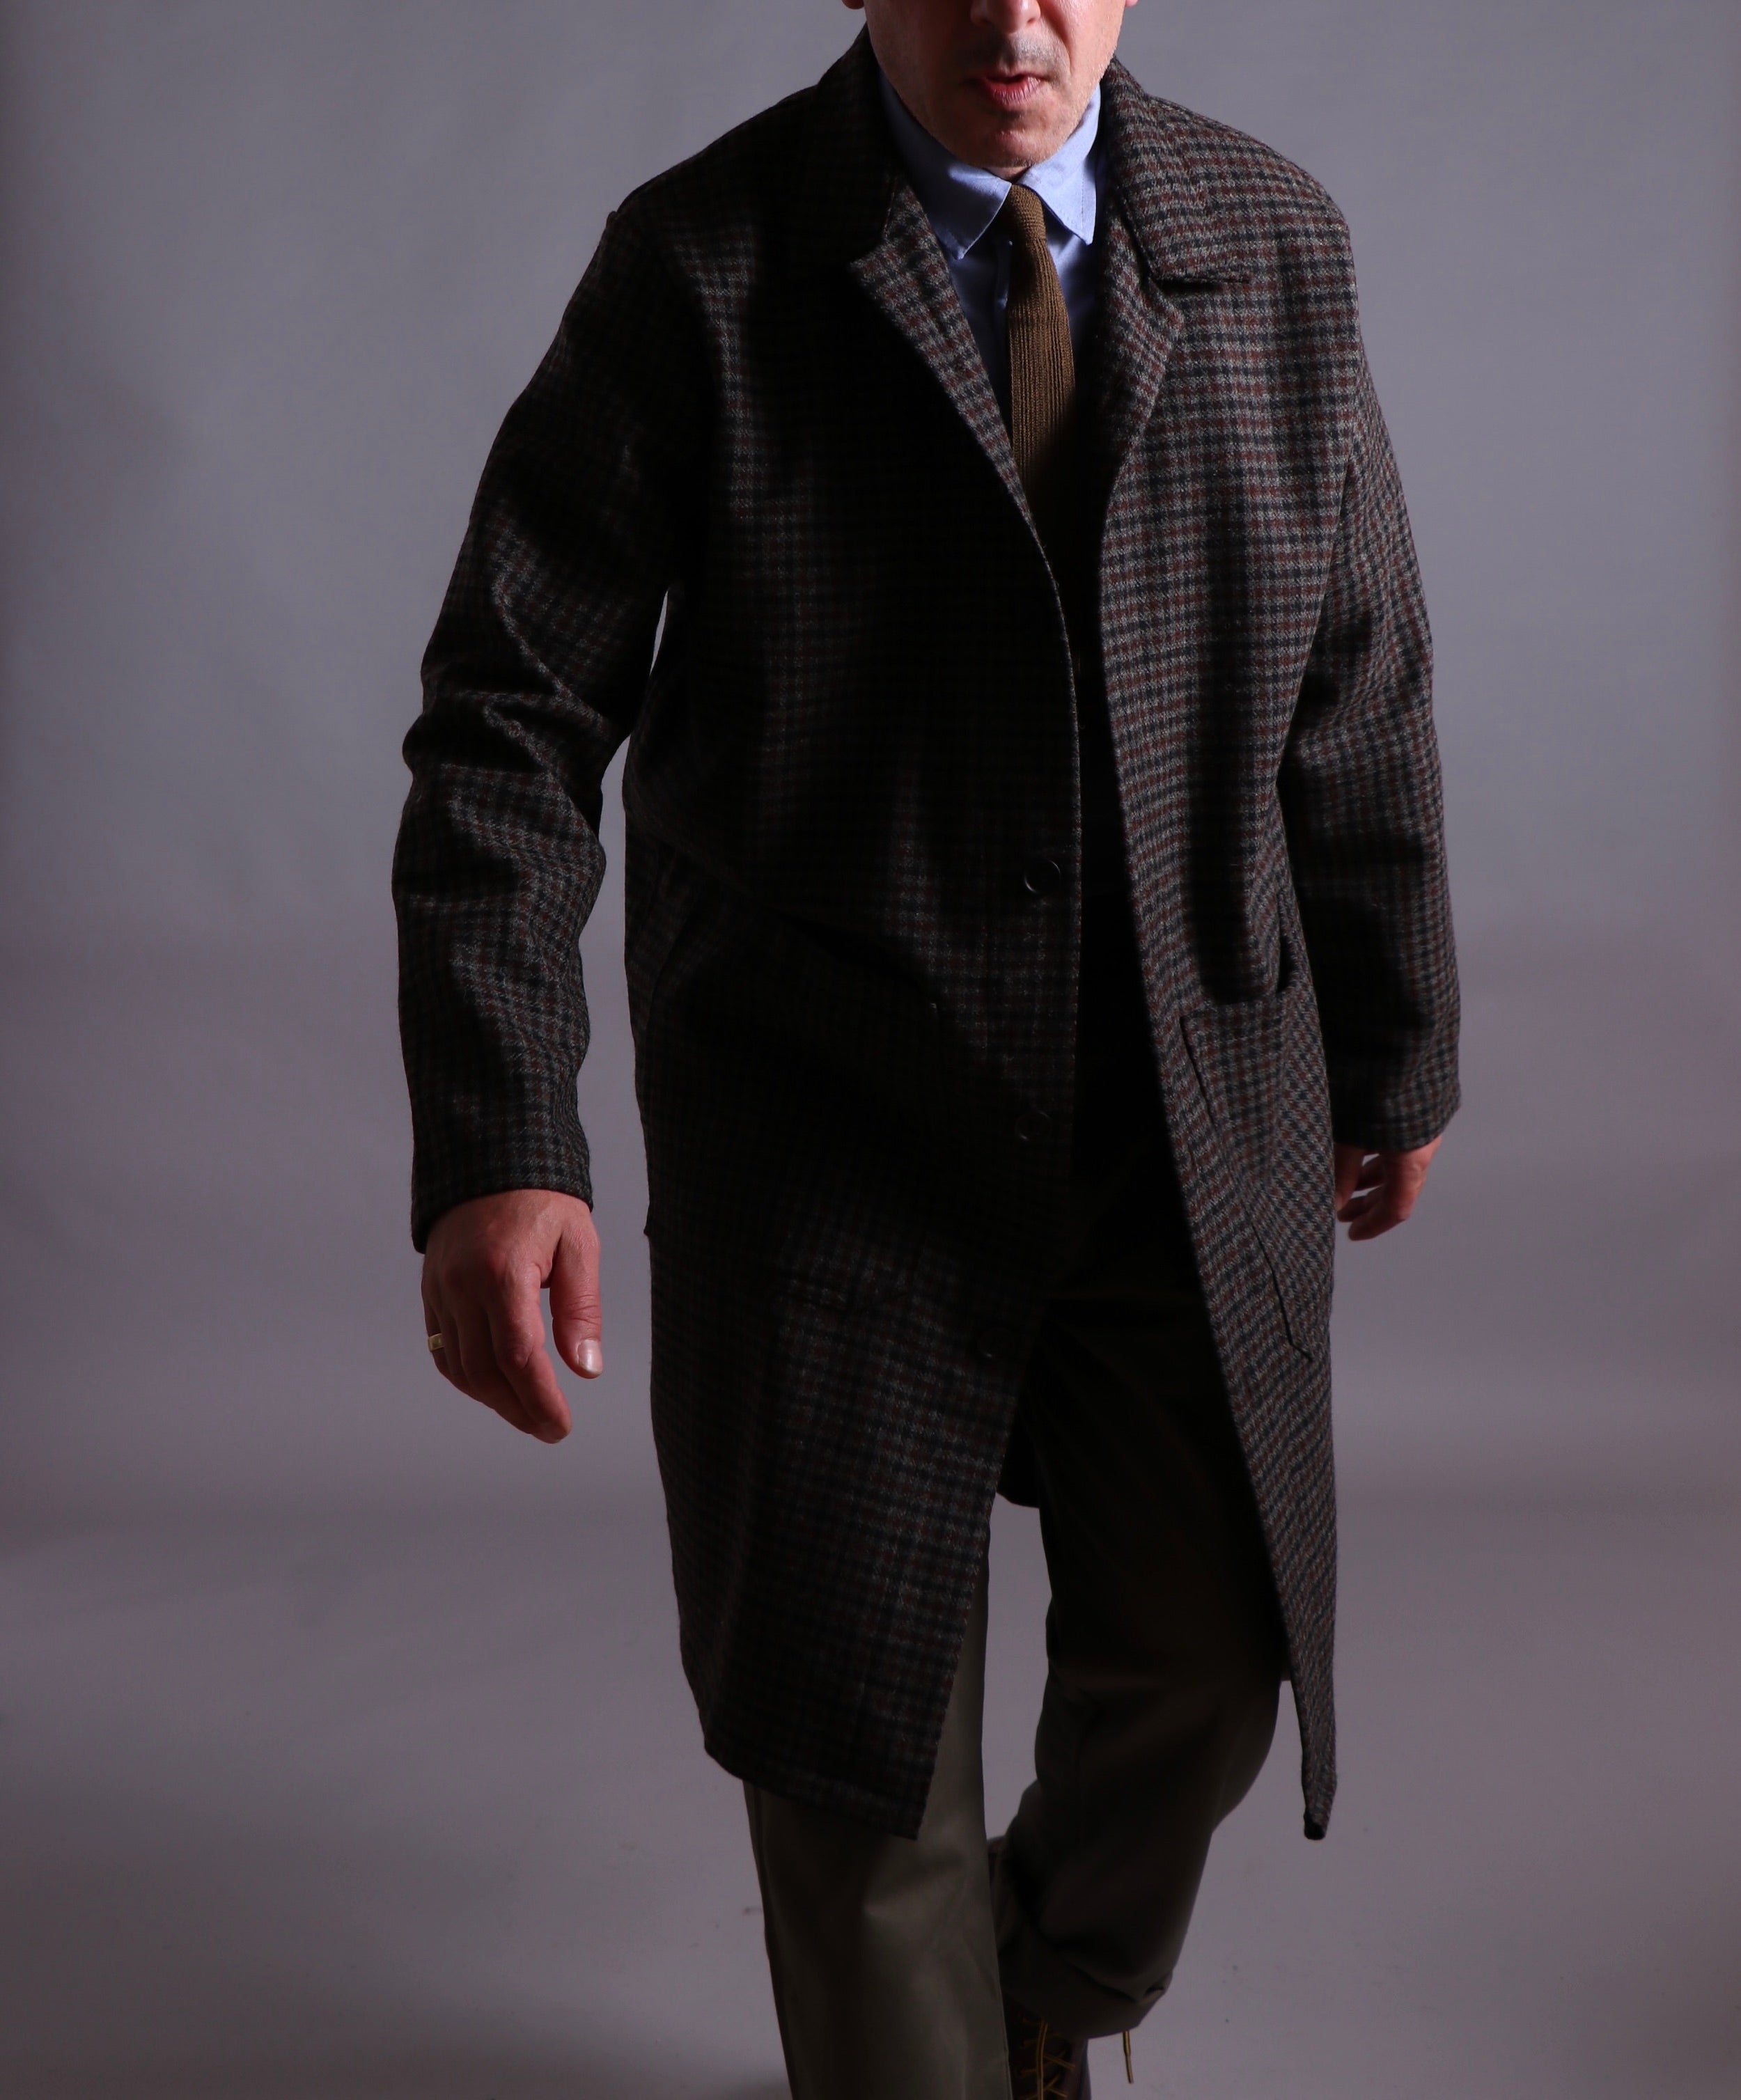 Enzo wears Carrier Company Wool Coat, with Chambray Poplin Shirt and Olive Work Trousers